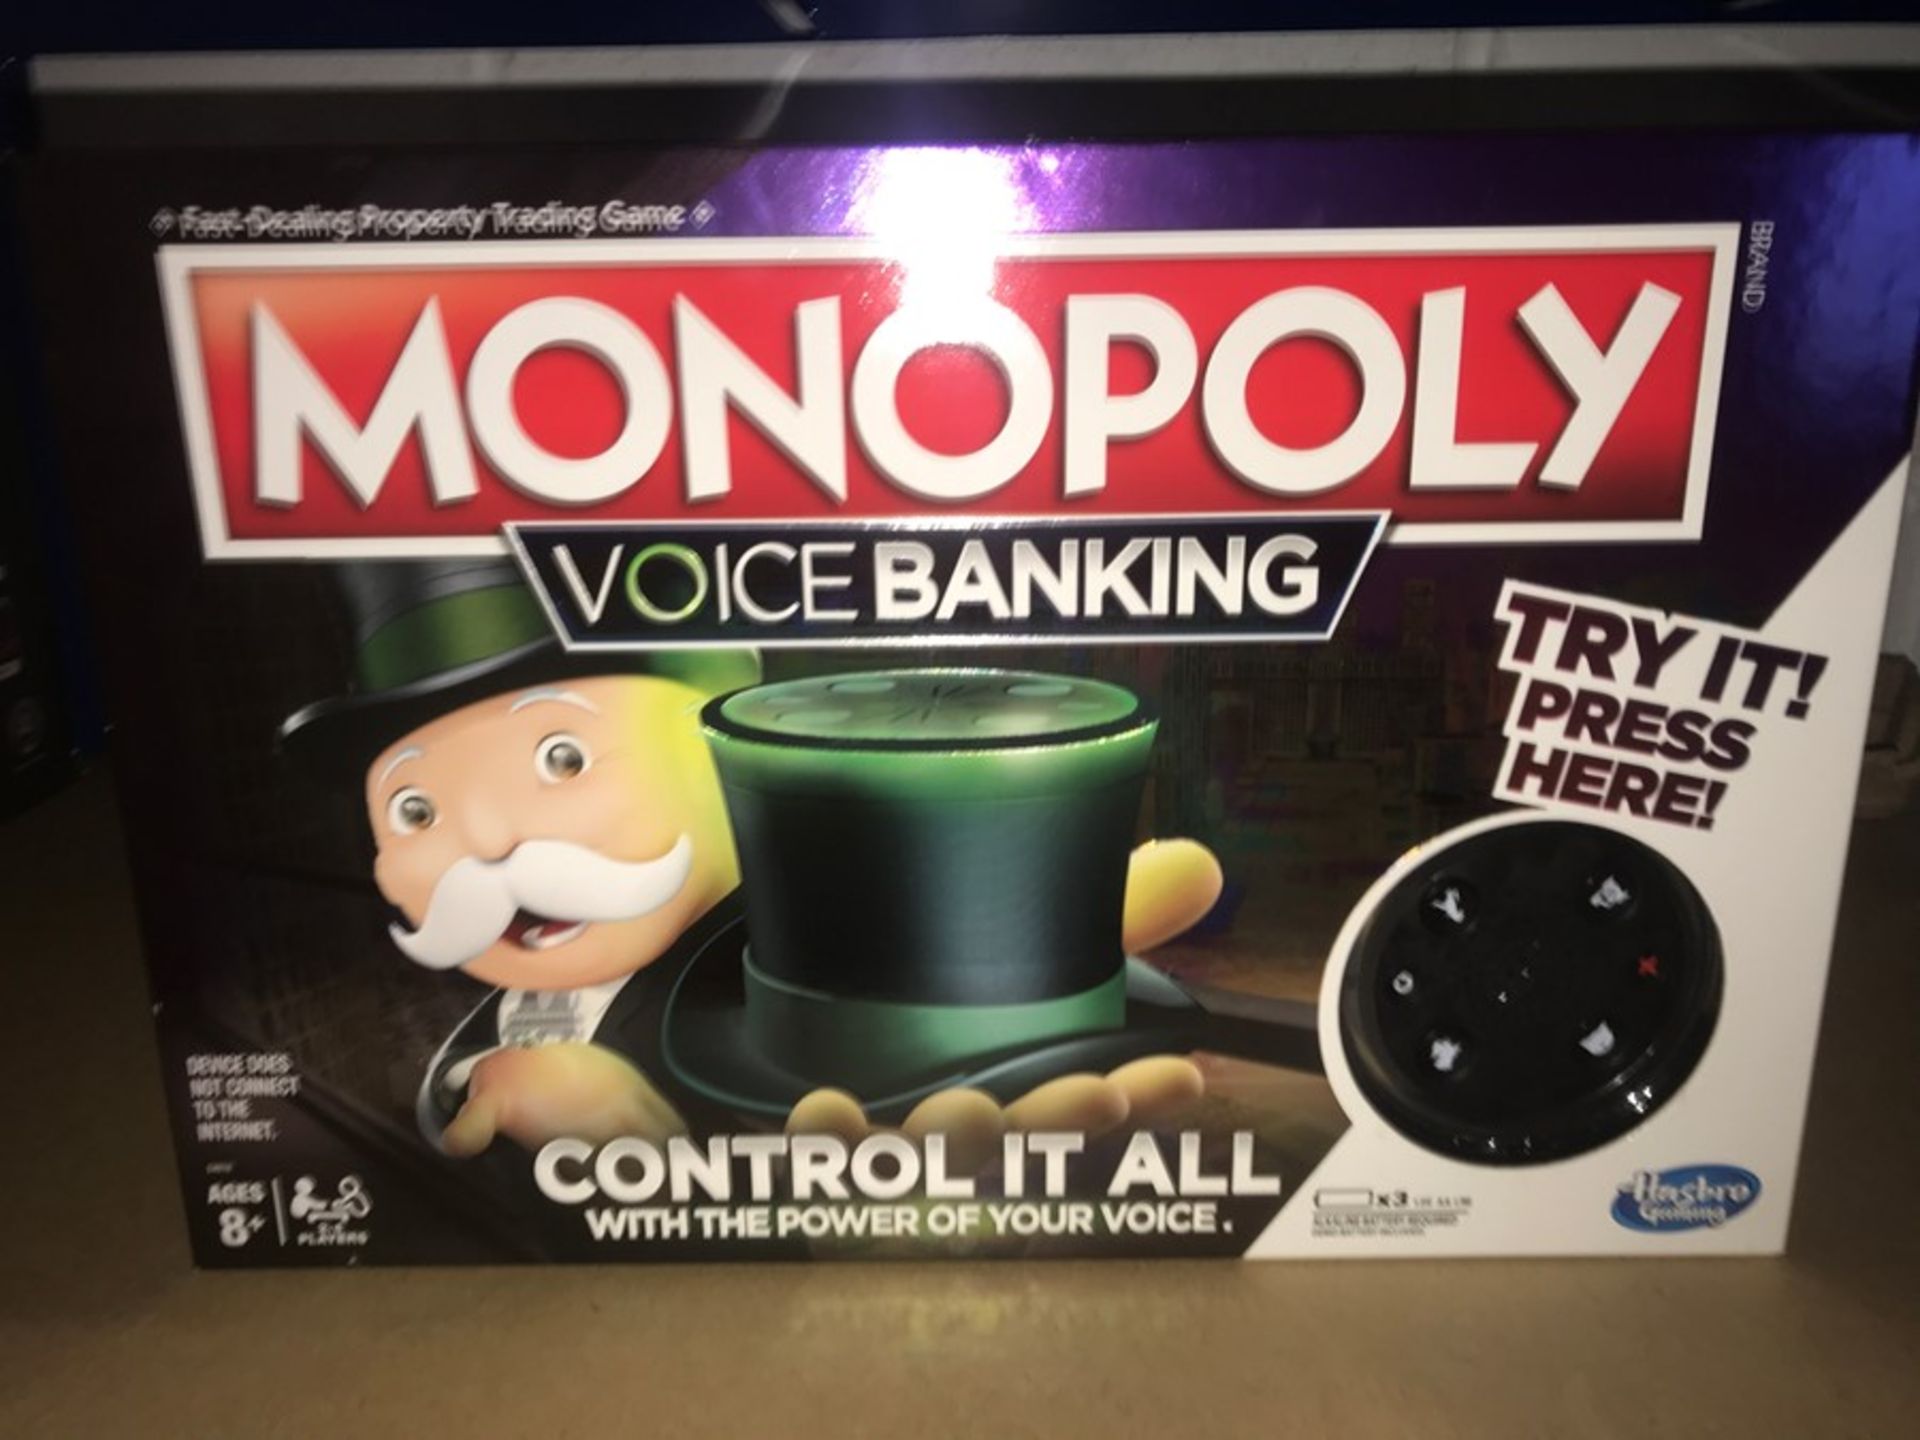 Monopoly Voice Banking Electronic Family Board Game for Ages 8 and up - Image 2 of 2